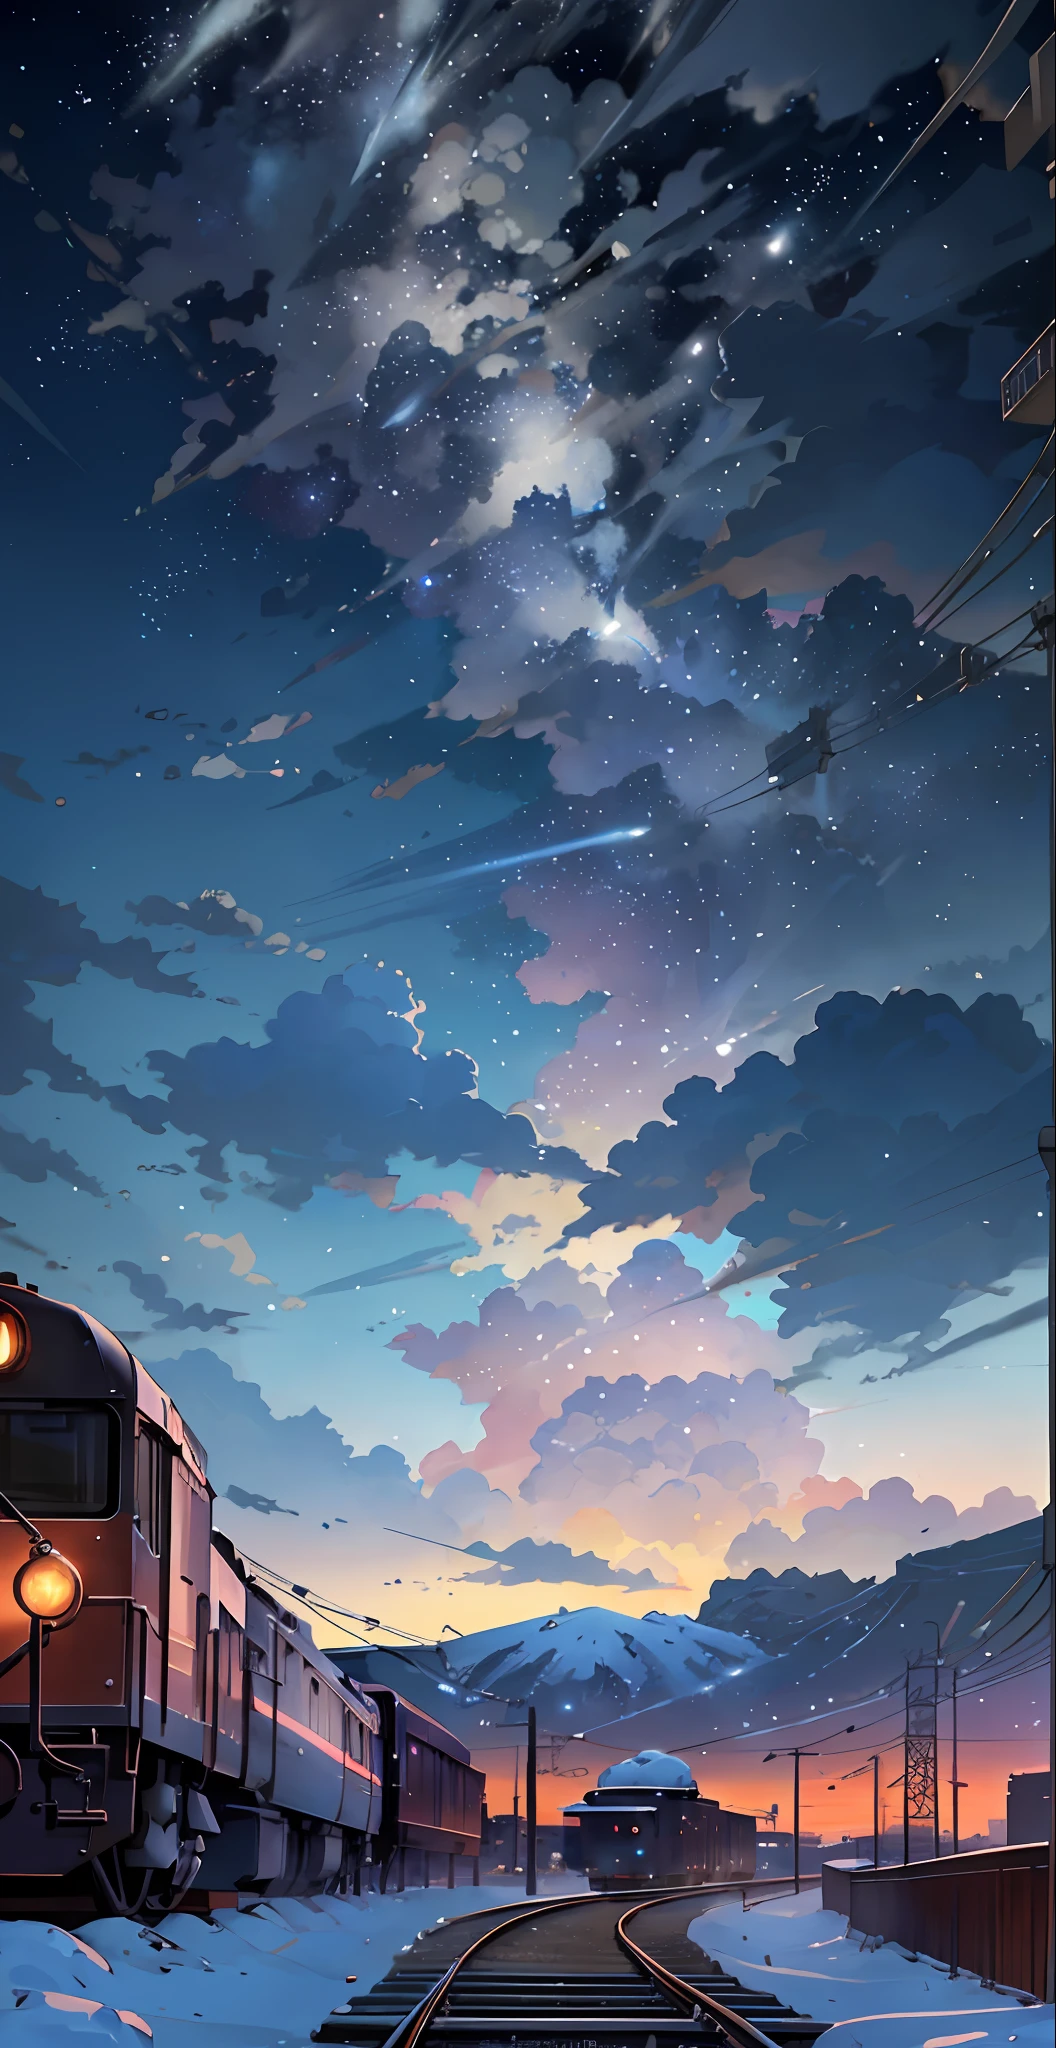 There is a train running along the tracks in the snow, Makoto Shinkai&#39;s concept art, tumblr, magic realism, beautiful anime scenes, cosmic sky. by makoto shinkai, ( ( makoto shinkai ) ), anime background art, anime backgrounds, Makoto Shinkai&#39;s style, anime movie backgrounds, galaxy express, no humans.